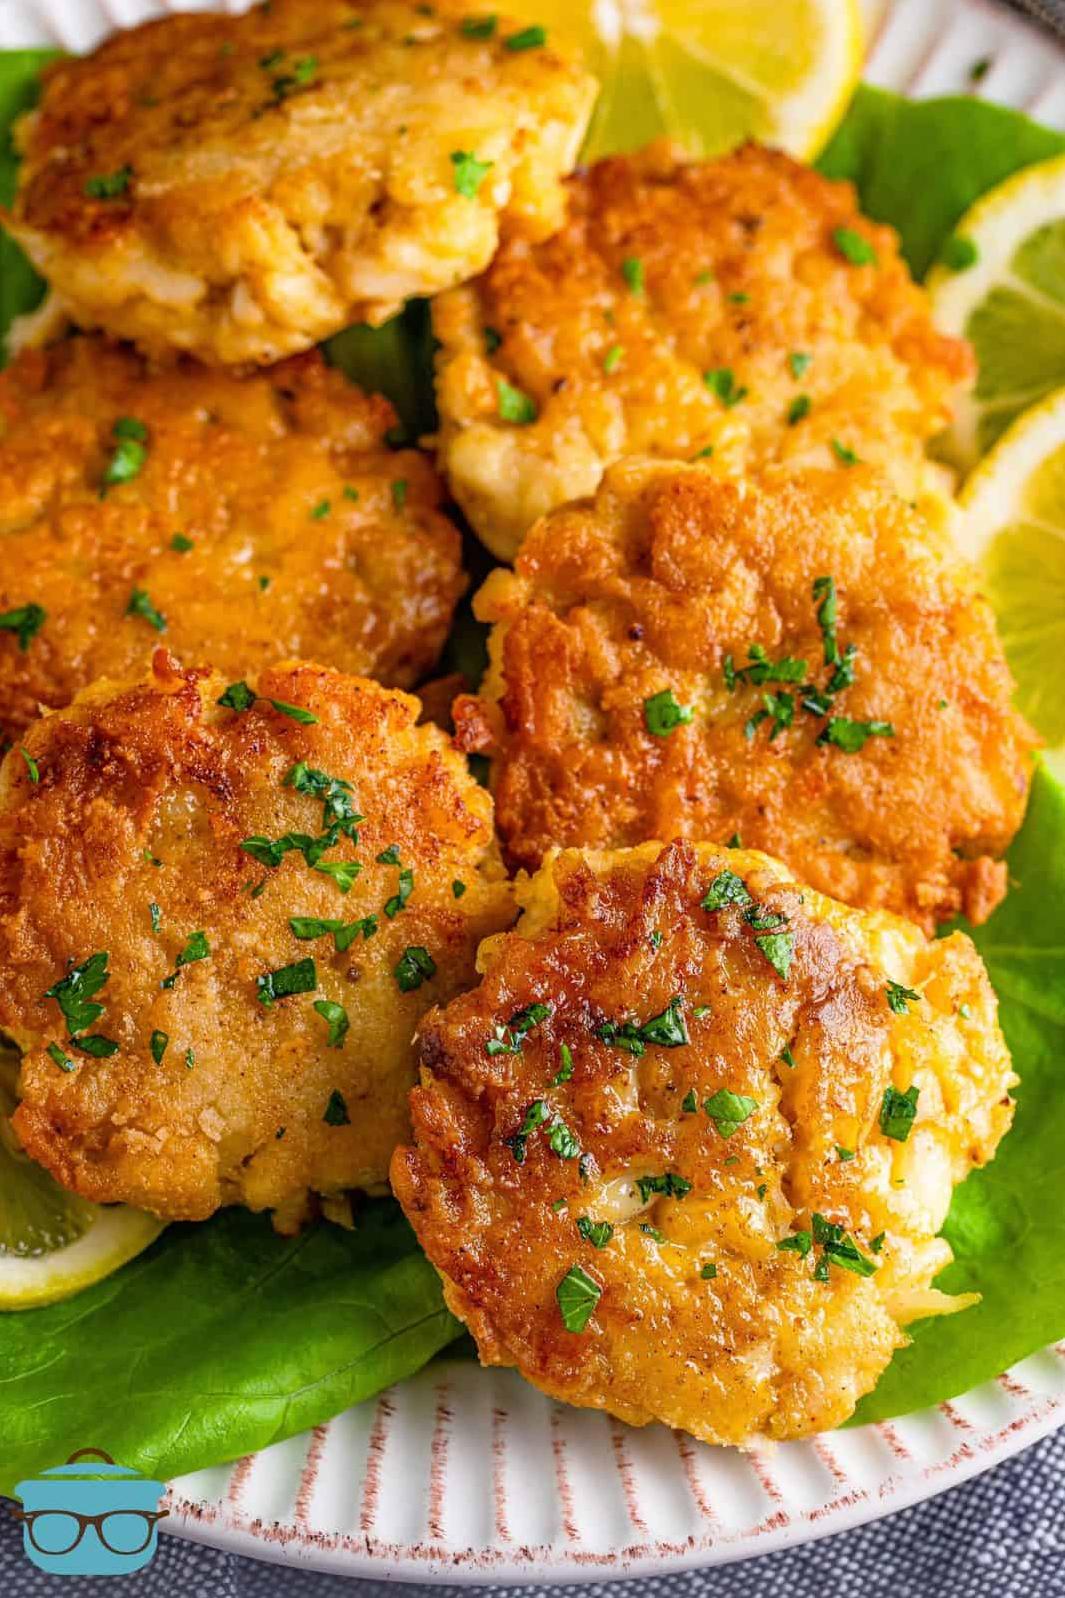  These crab cakes are crispy on the outside and delicate on the inside.